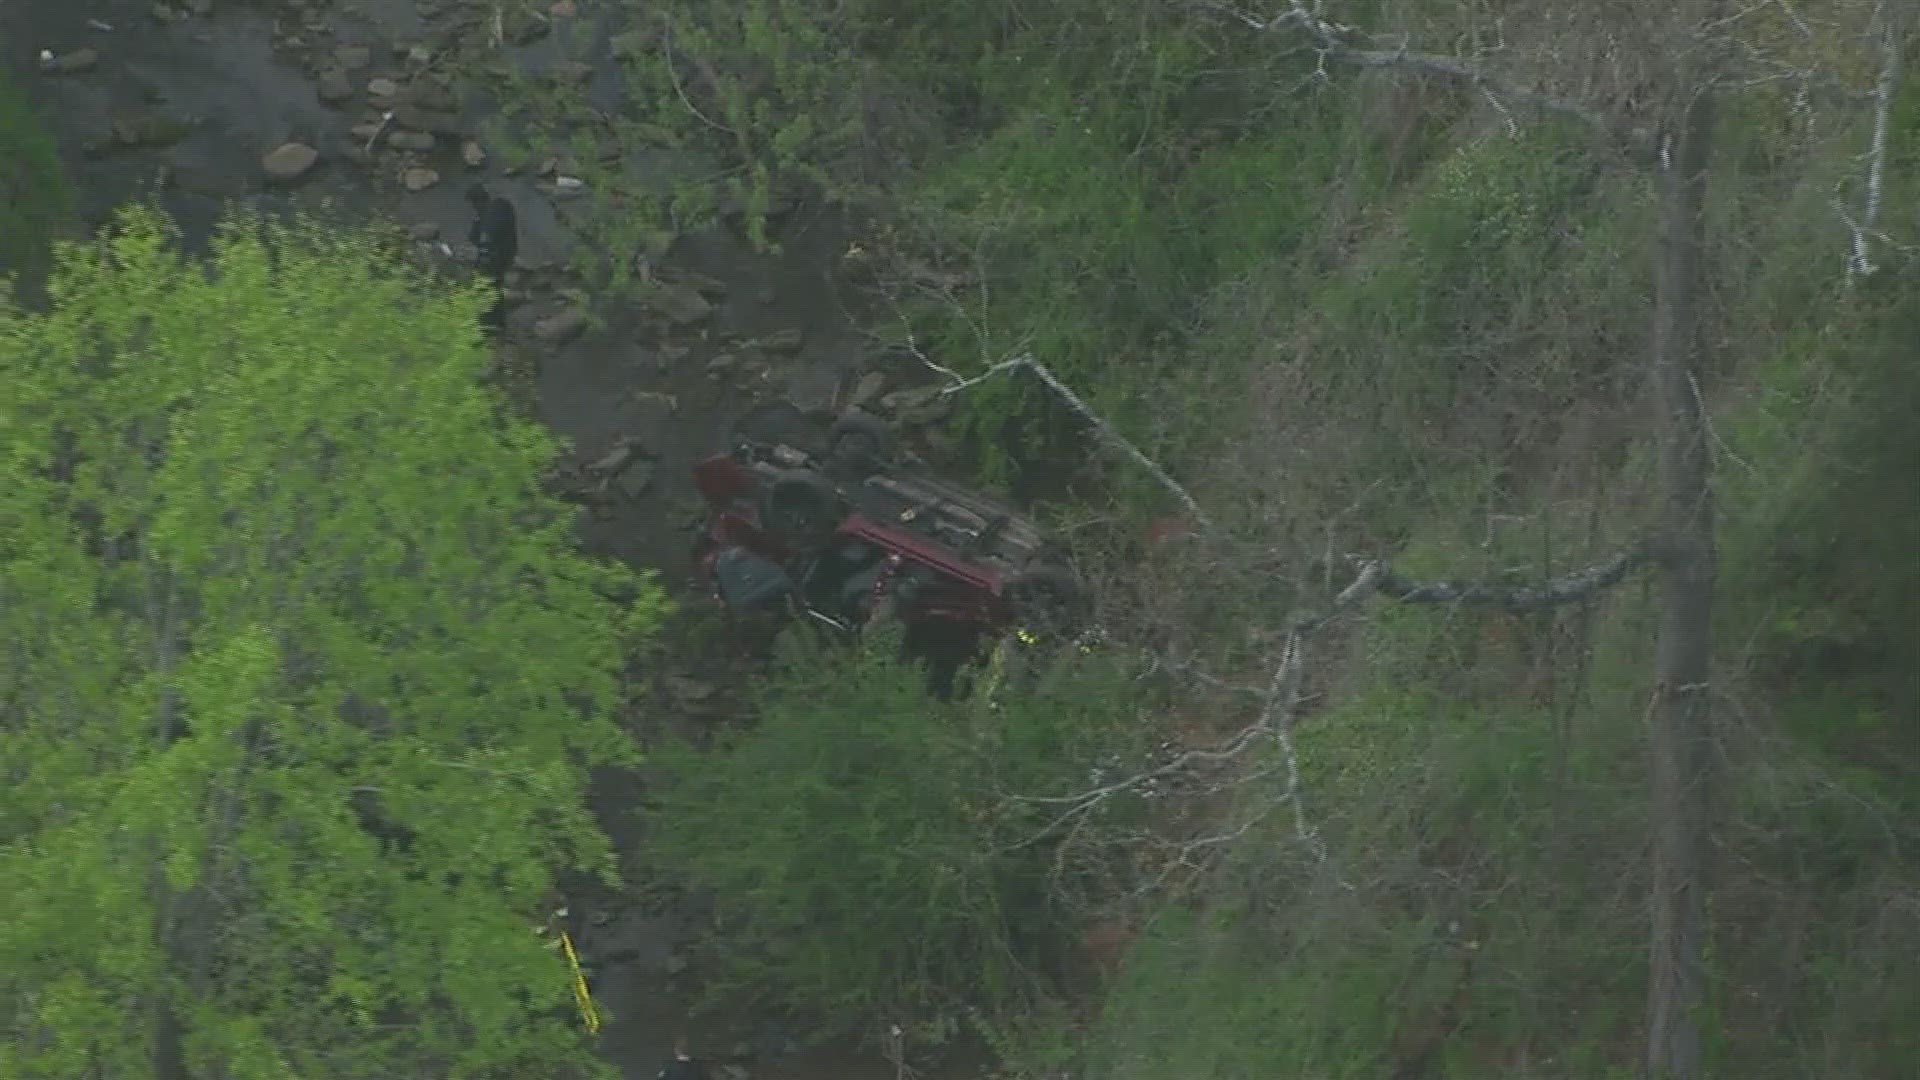 11Alive's SkyTracker is over the scene where a car can be seen flipped over in a creek with what appears to be at least a dozen first responders on scene.